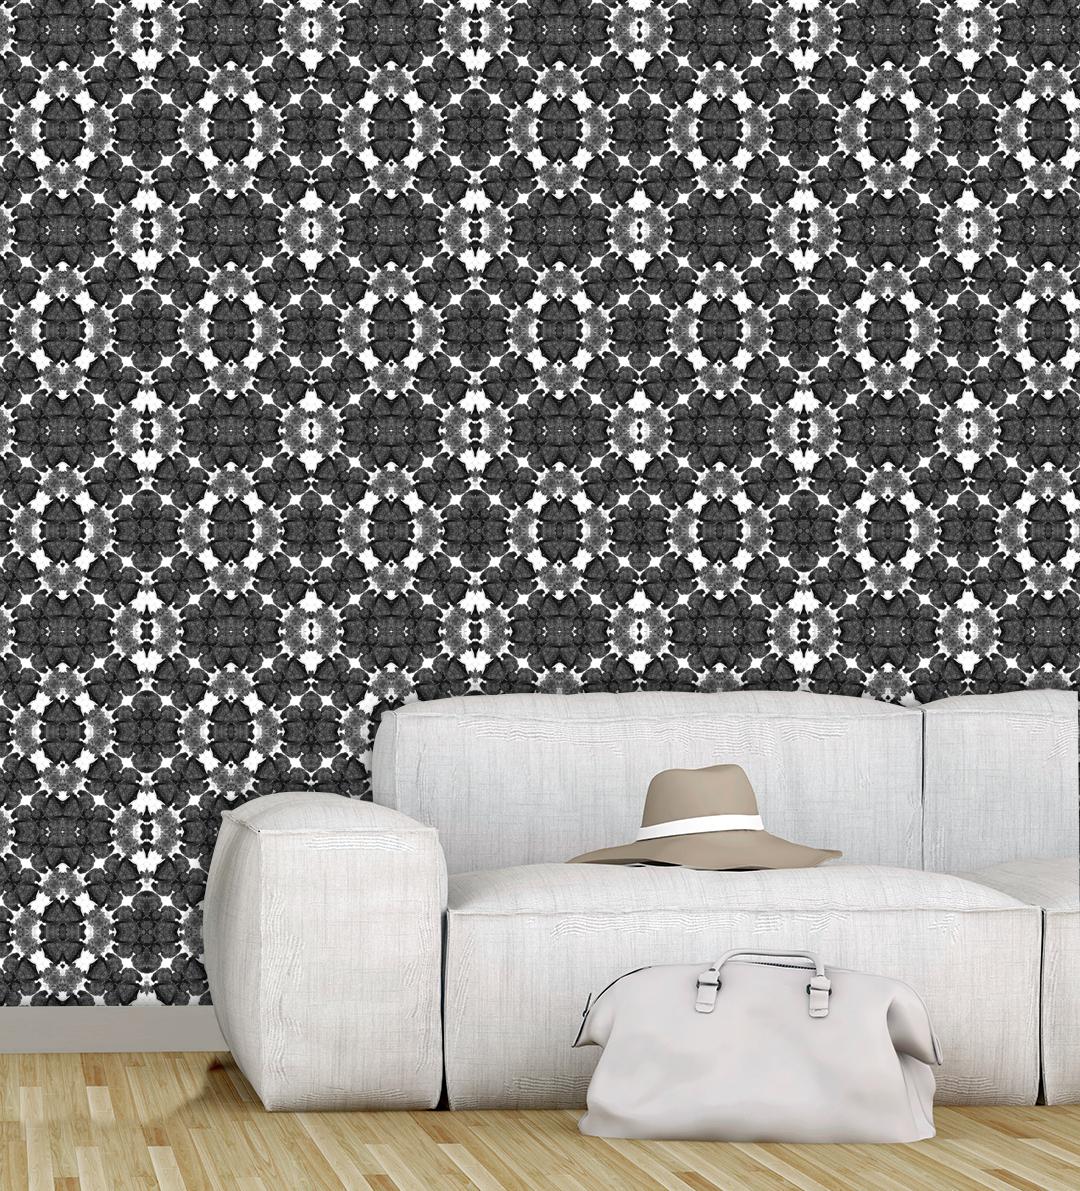 Our Midnight Fleur design was created and inspired by Paris and the poetic and evocative nature of the city. Midnight Fleur is a modern twist on chic black and white wallpaper, while still evoking the timeless and elegant aesthetic of Parisian